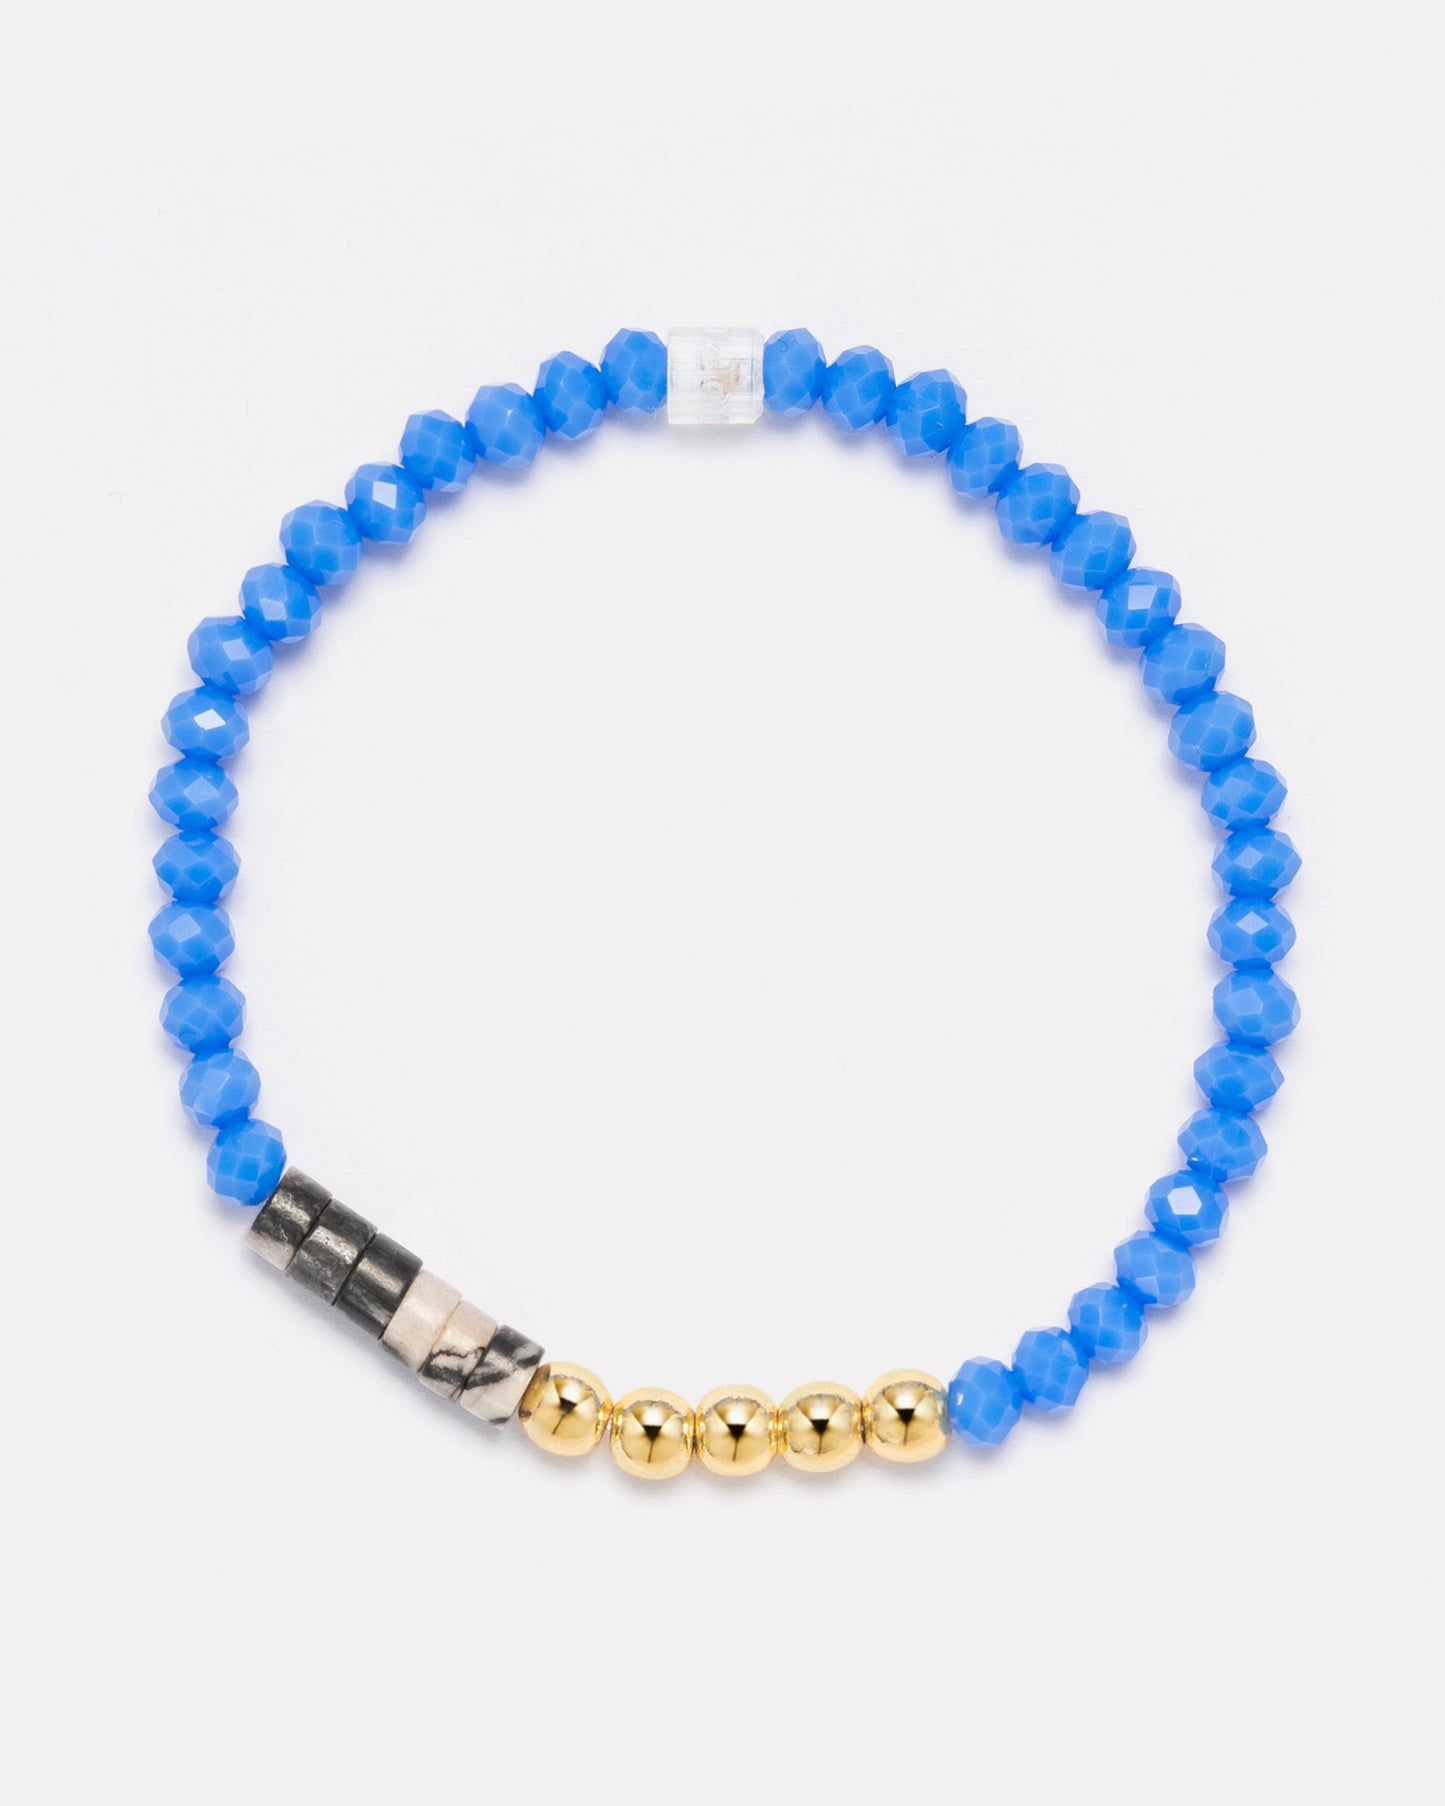 Beaded Bracelet with Blue Seed Beads, Marble Discs and 18kt Gold Beads